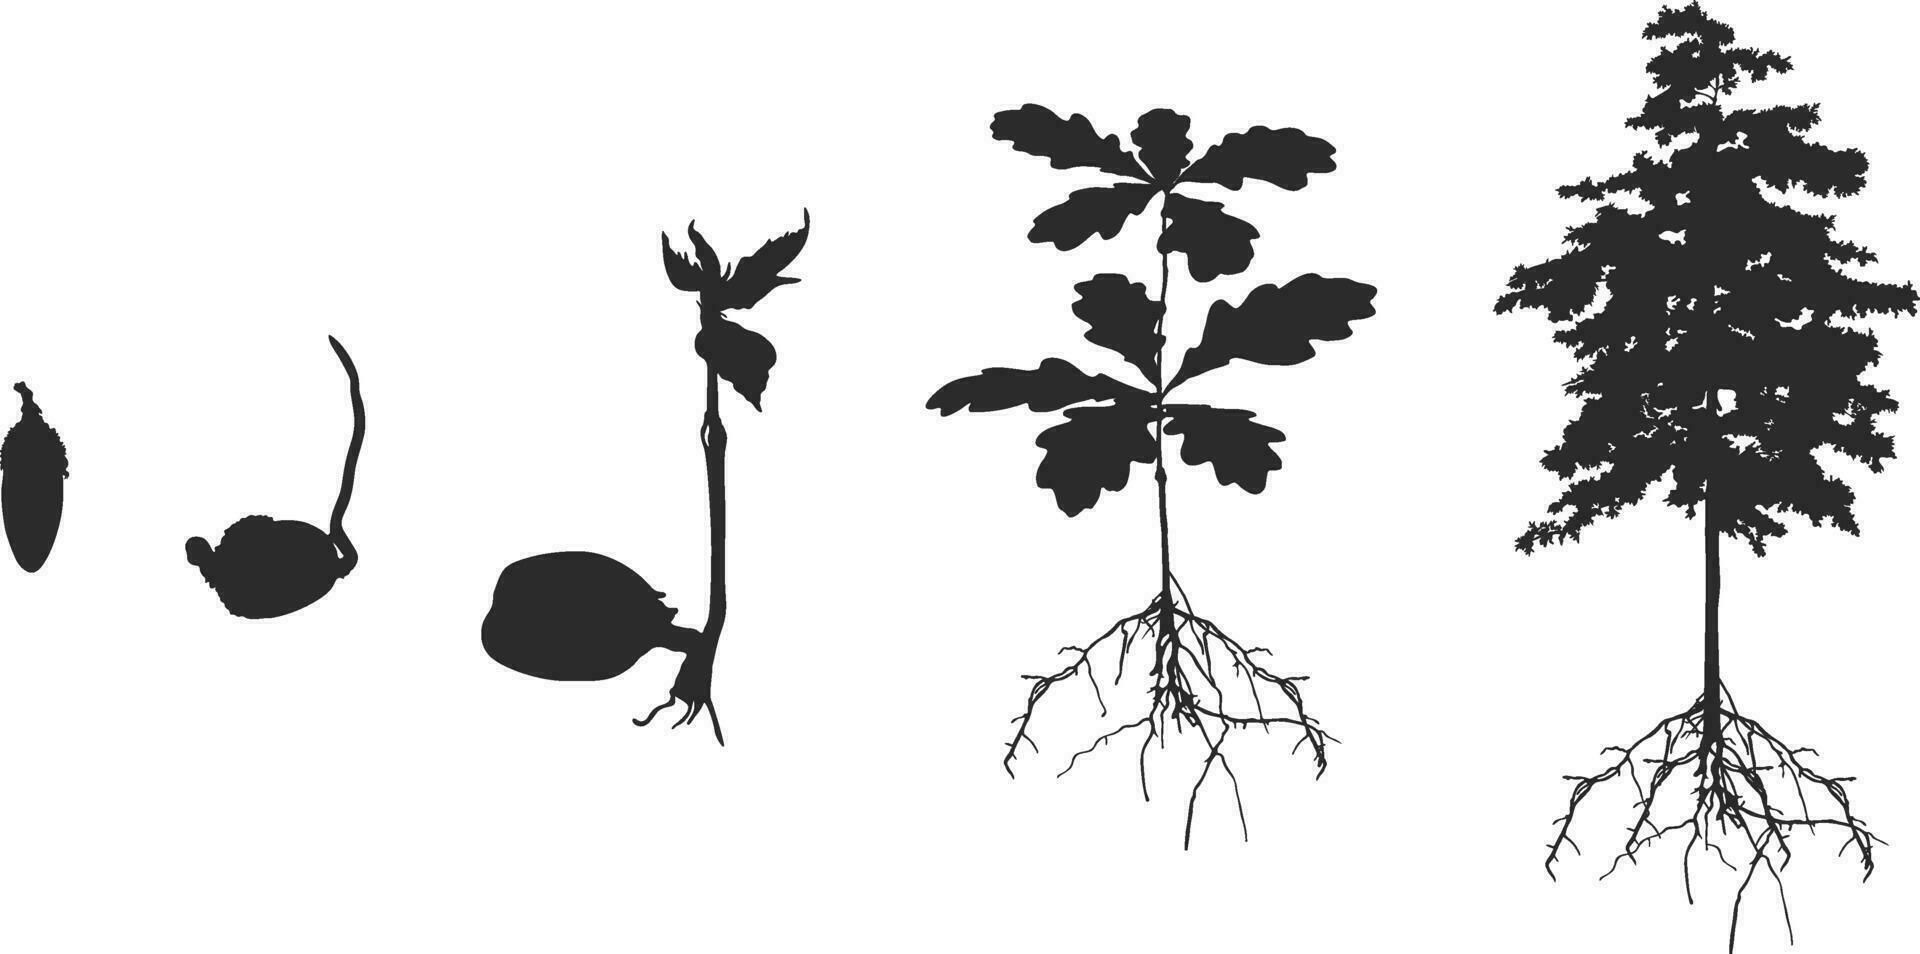 Life cycle of oak tree silhouette,  Cycle of tree silhouette, Life cycle of oak vector, Growing oak seed silhouette V02. vector